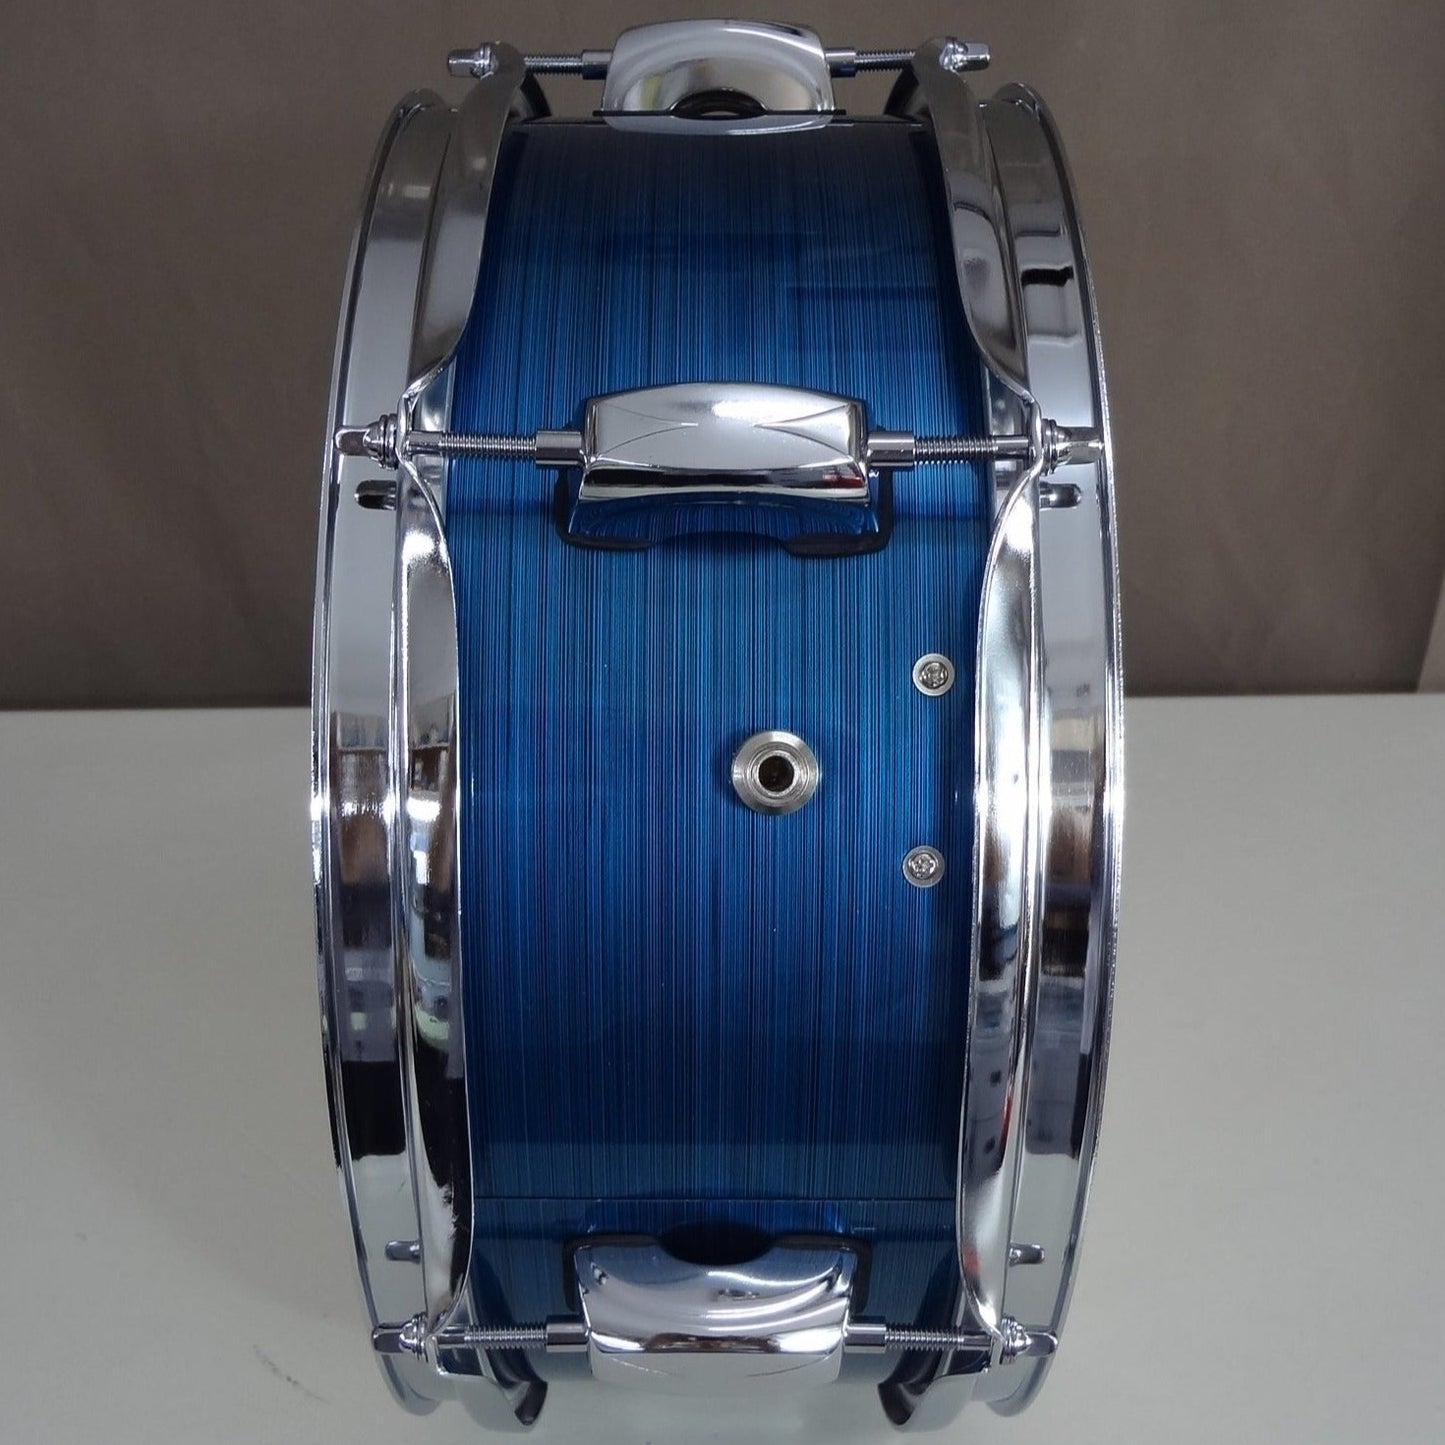 New 13 Inch Custom Electronic Snare Drum - Teal Strata